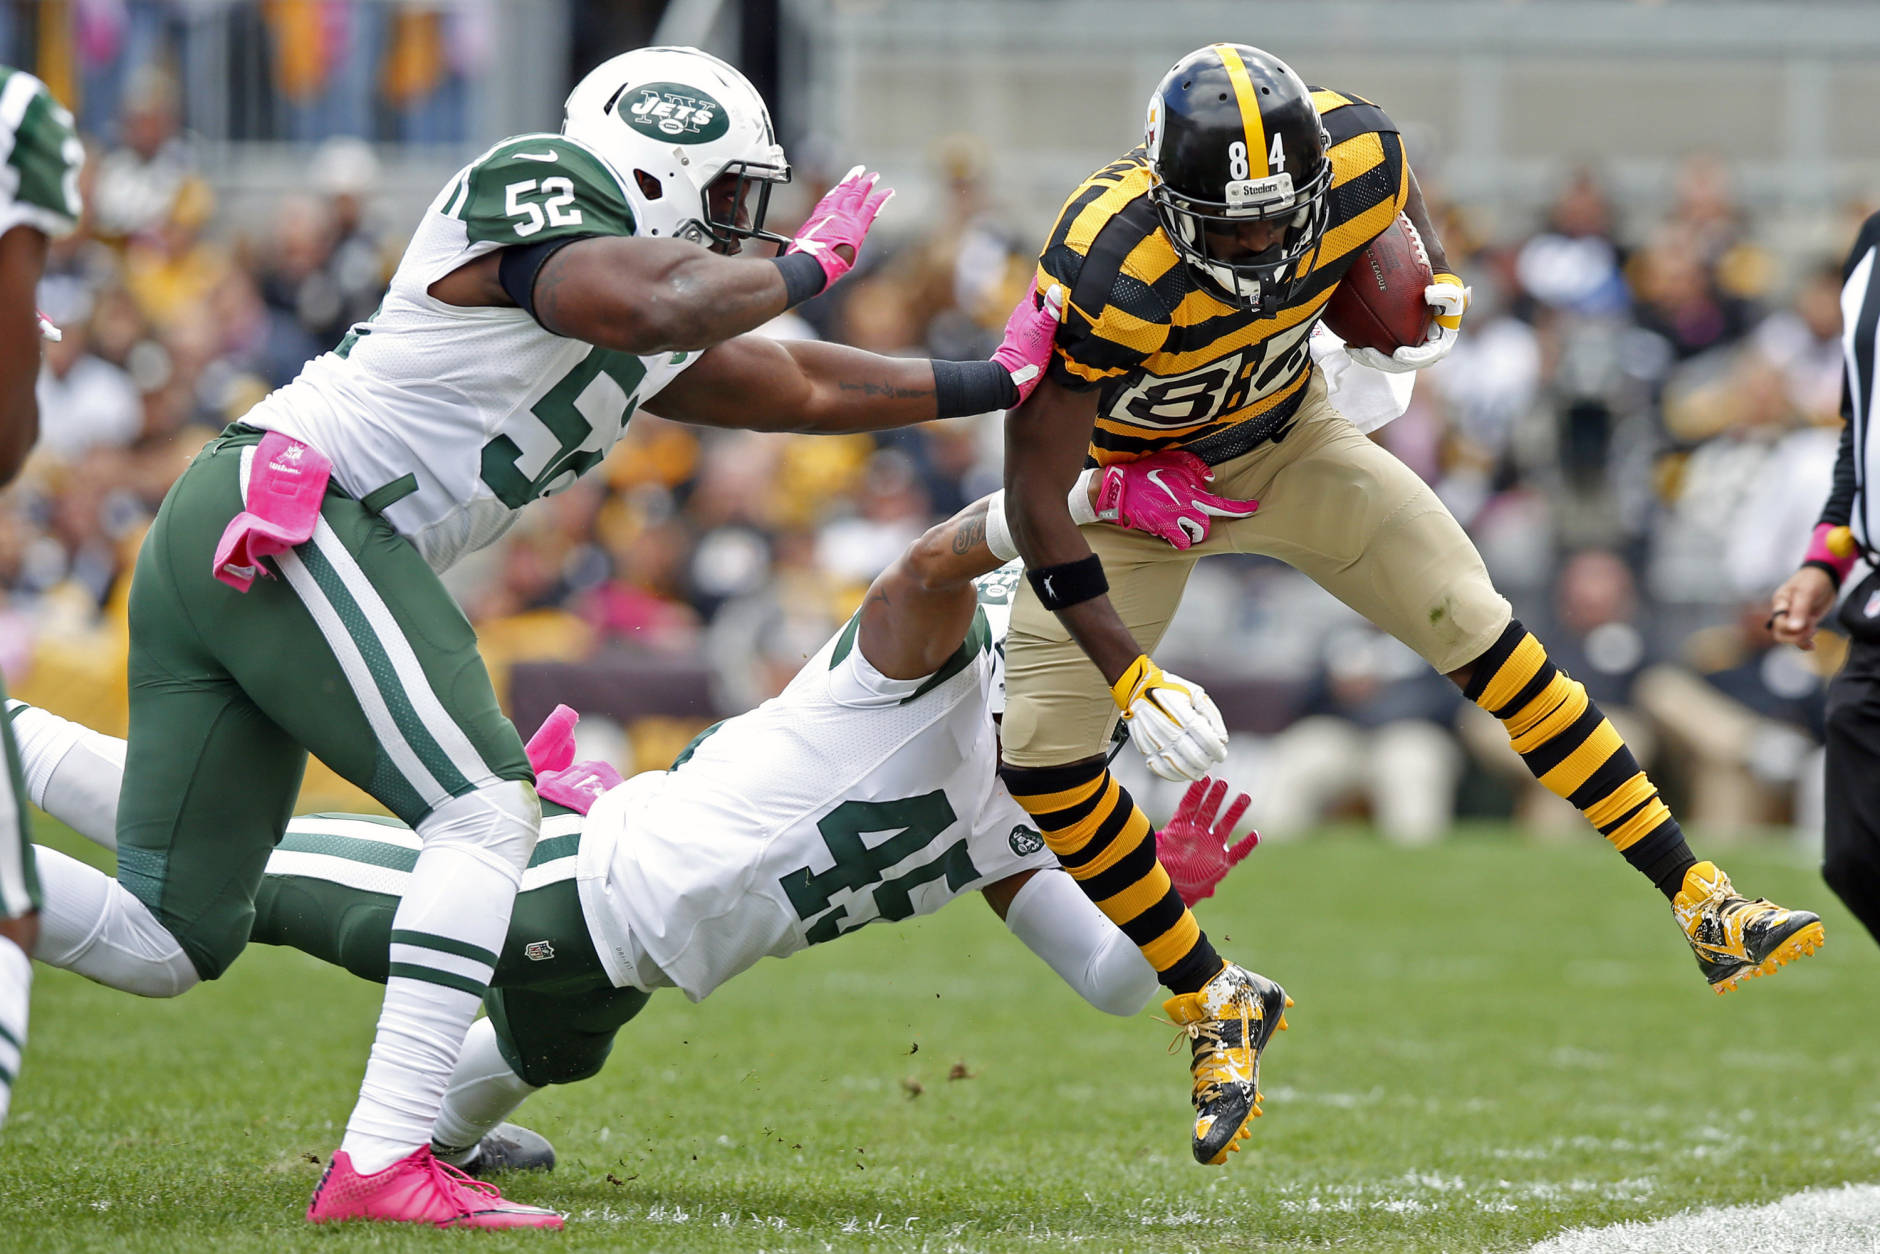 Pittsburgh Steelers wide receiver Antonio Brown (84) is knocked out of bounds by New York Jets middle linebacker David Harris (52) and strong safety Rontez Miles (45) during the first half of an NFL football game in Pittsburgh, Sunday, Oct. 9, 2016. (AP Photo/Jared Wickerham)